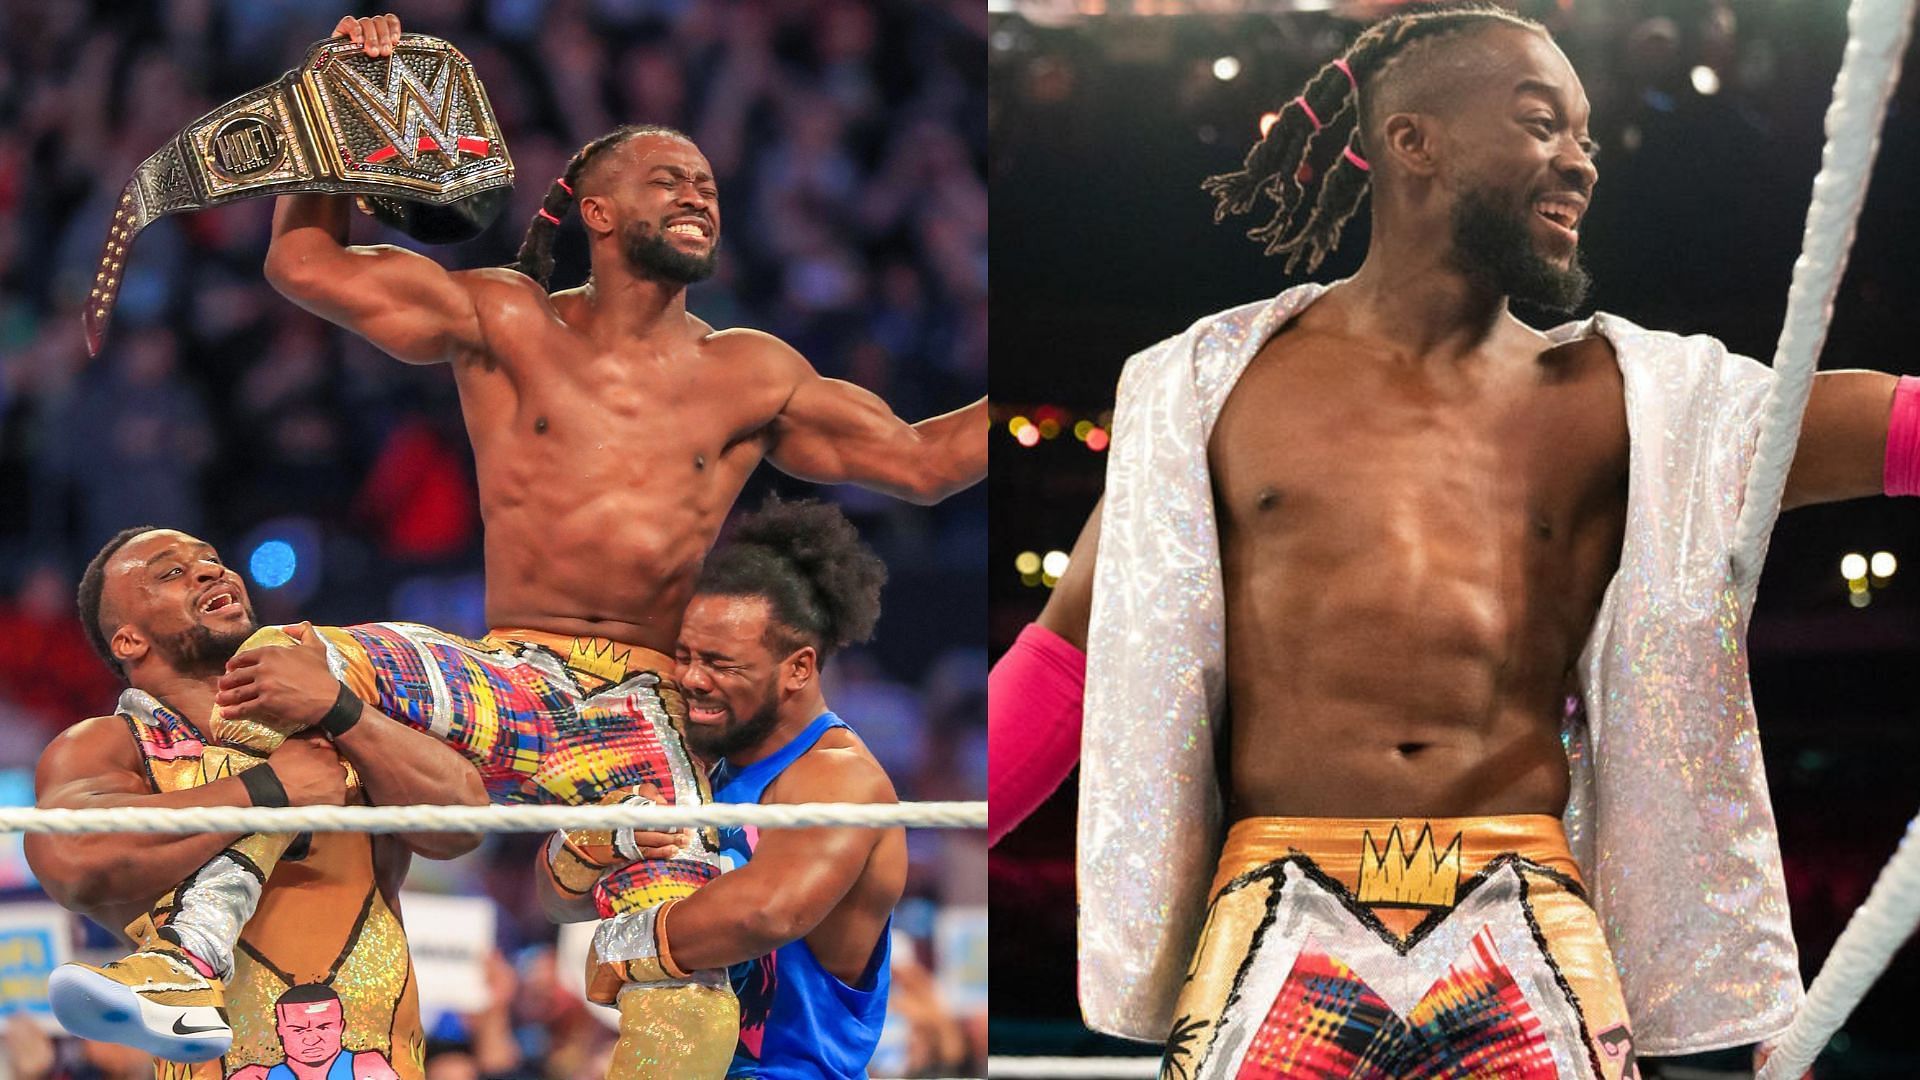 SmackDown stable The New Day consisting of Big E, Xavier Woods, and Kofi Kingston